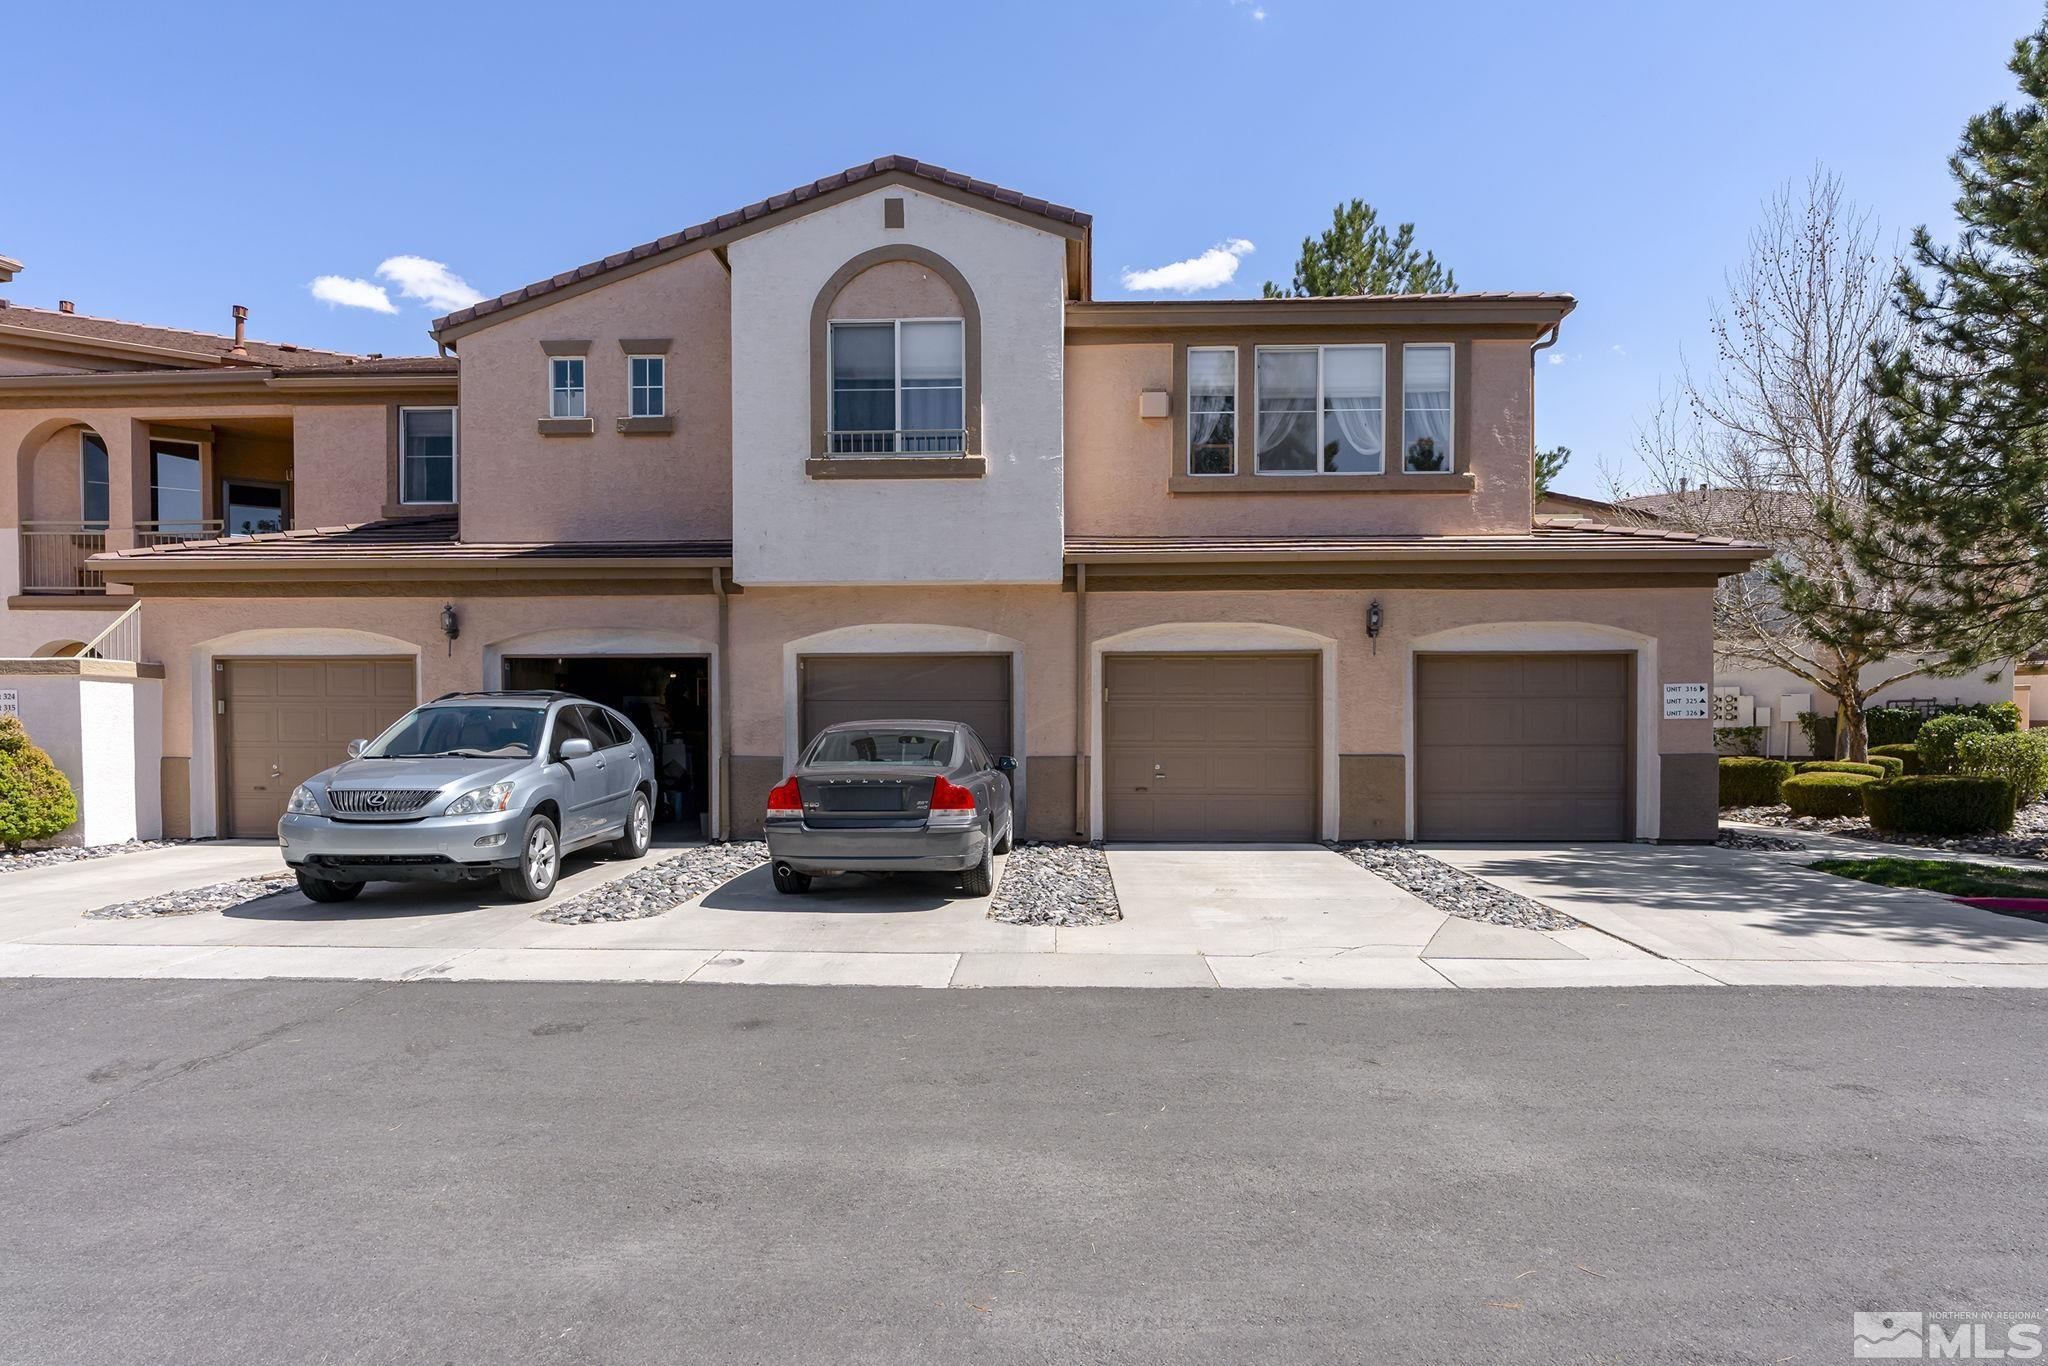 Browse active condo listings in Spanish Springs South